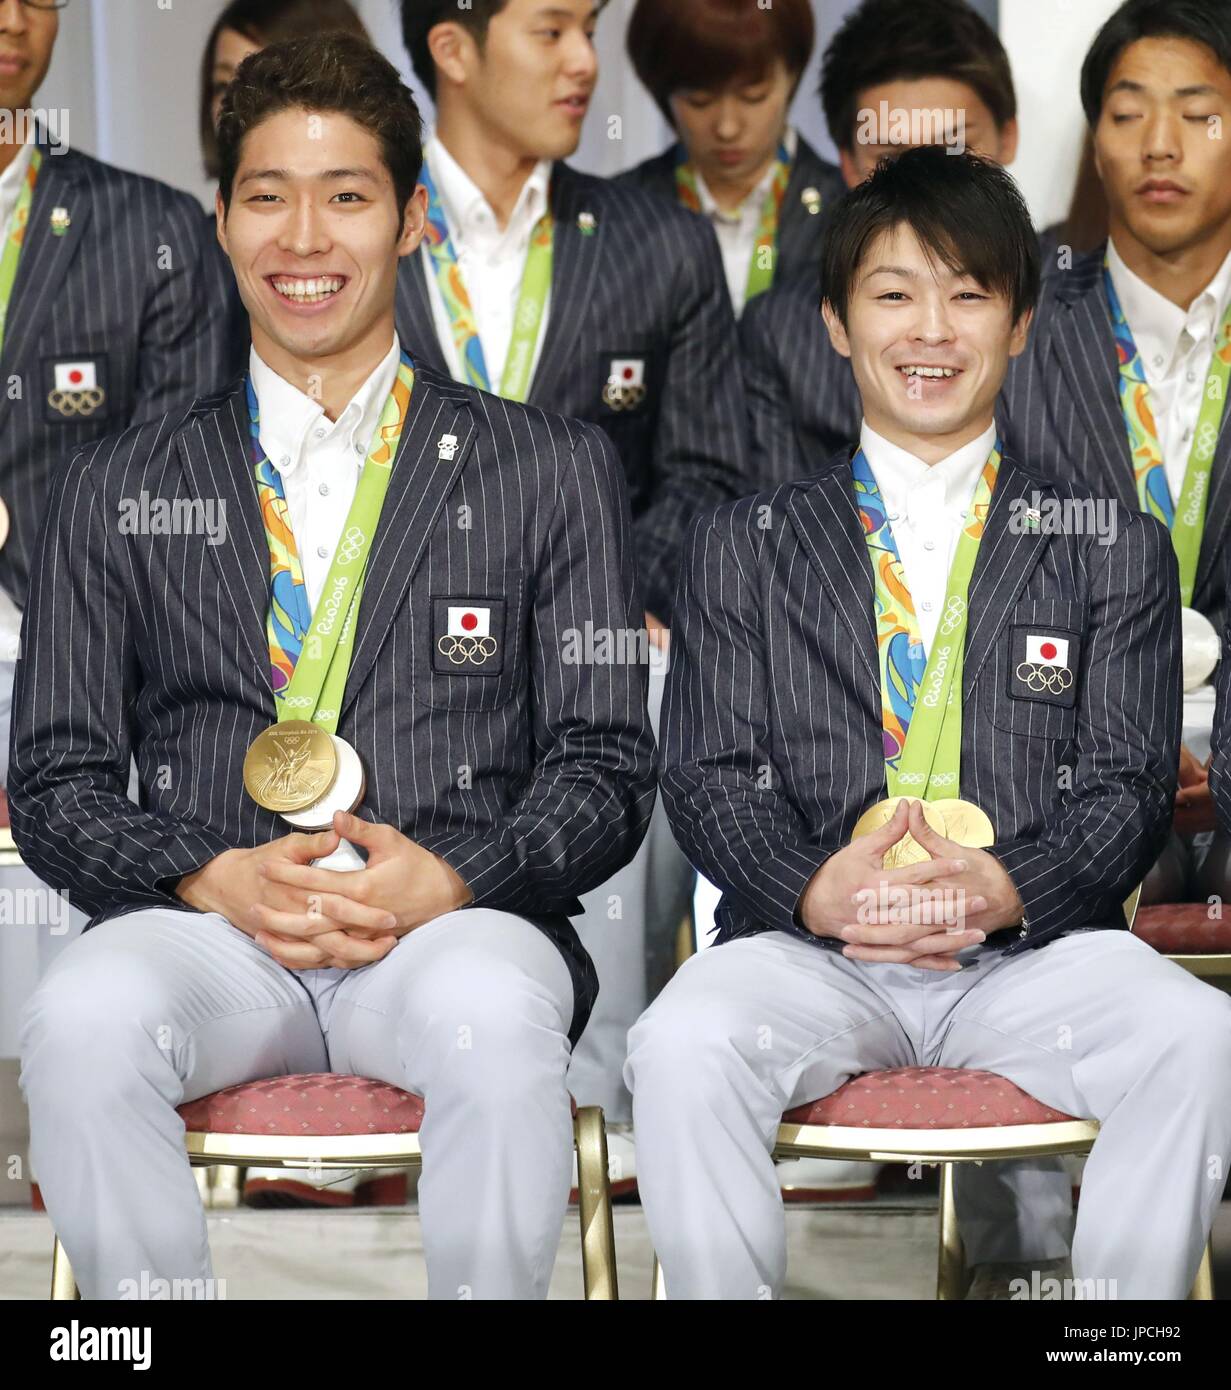 Rio Olympic gold medalists -- swimmer Kosuke Hagino (L) and gymnast Kohei Uchimura -- attend a press conference of Japanese medal winners in Tokyo on Aug. 24, 2016. The medalists expressed their appreciation to all those who cheered for them during the Rio Games and looked forward to more excitement at the 2020 Tokyo Olympics. (Kyodo) ==Kyodo Stock Photo